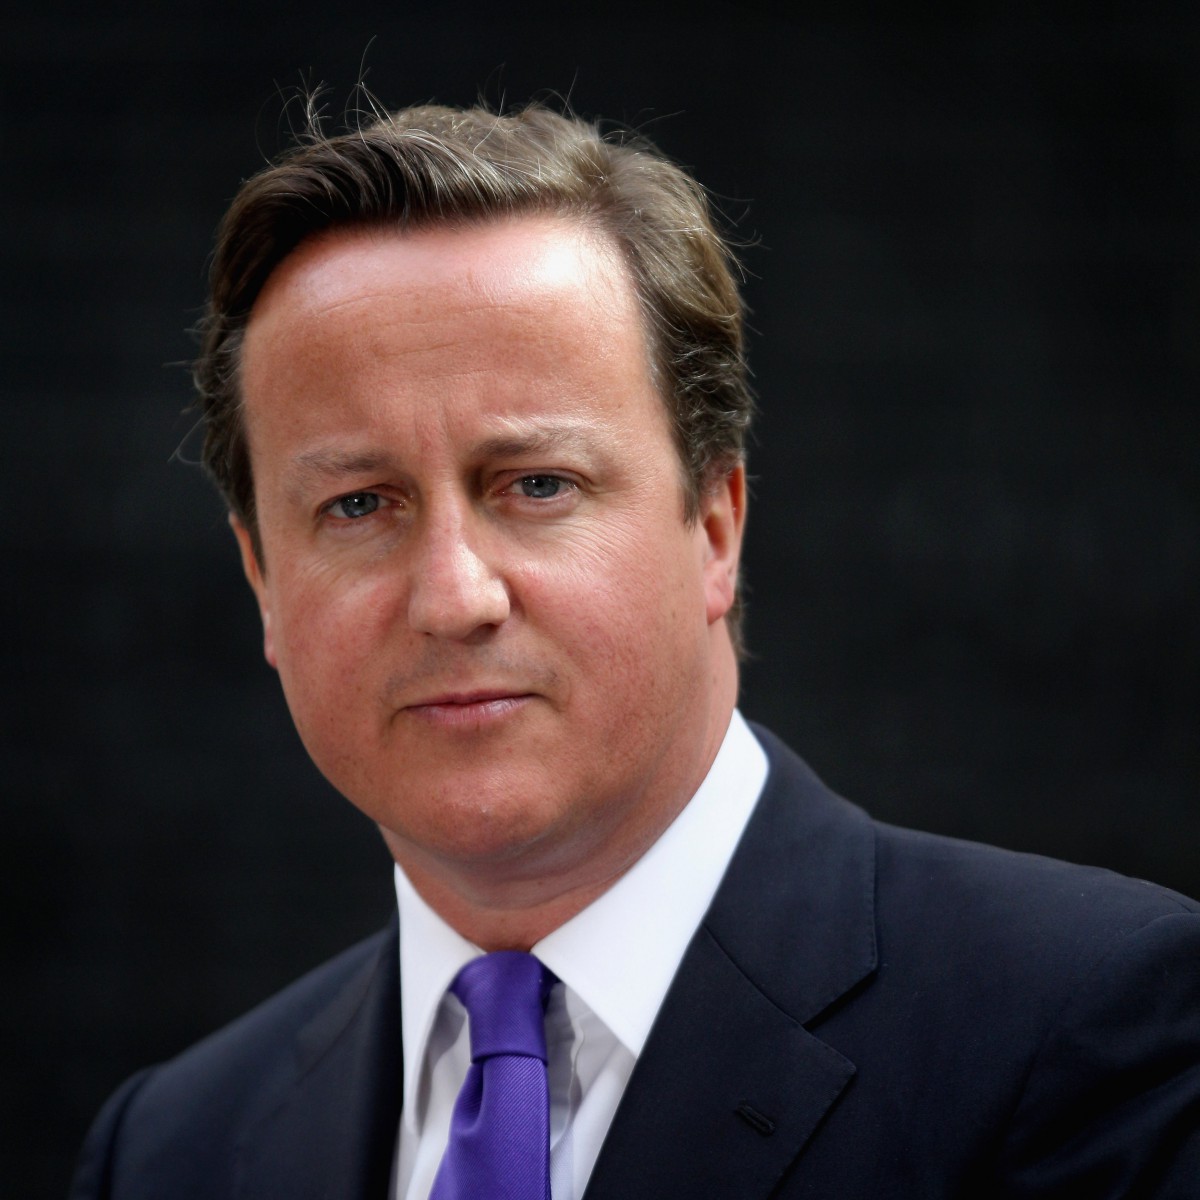 David Cameron slashed the size of the state by 5.4 per cent of GDP during his time as PM